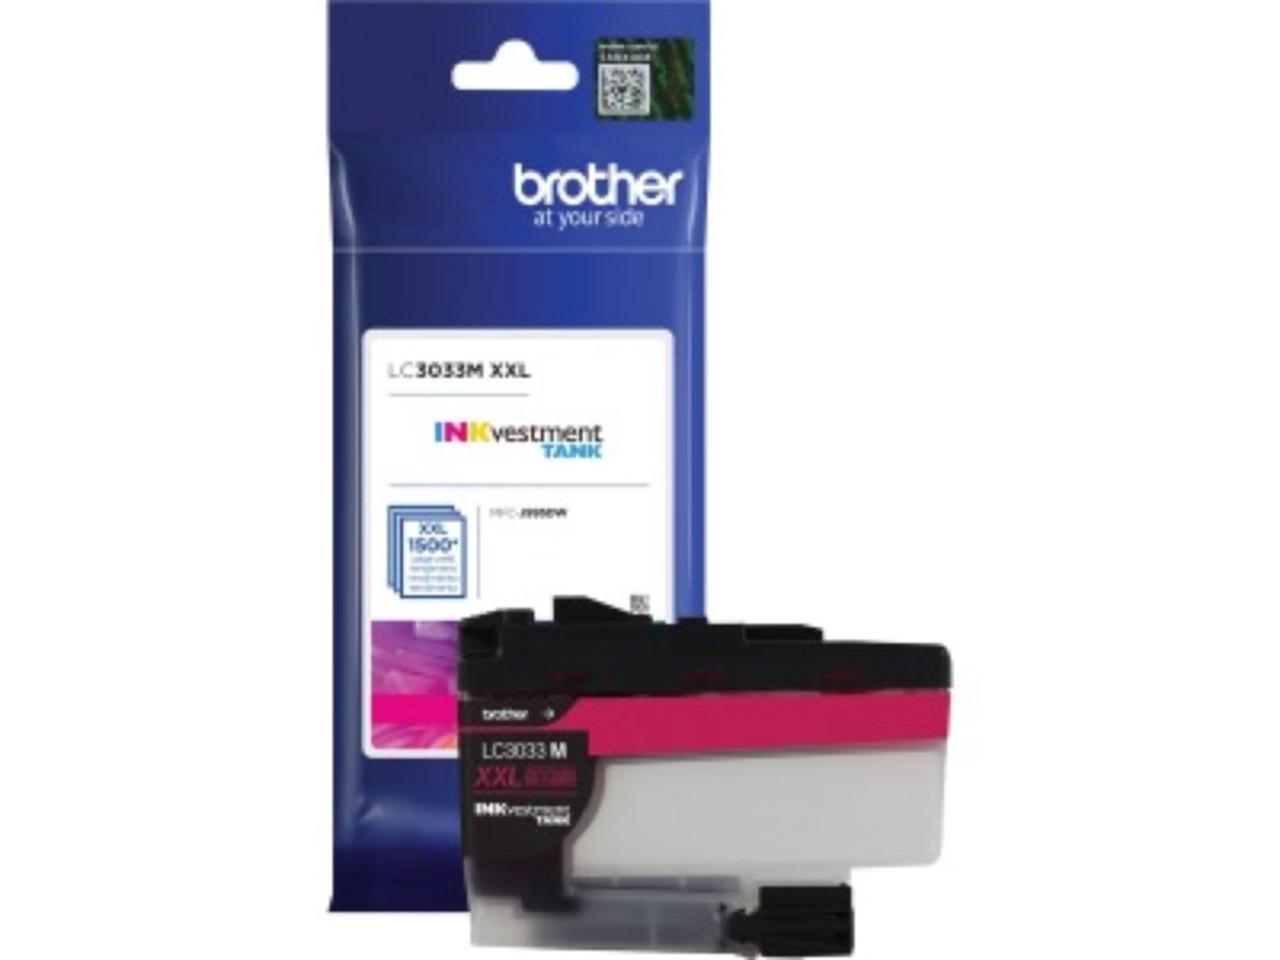 Brother LC3033M Super High Yield Ink Cartridge - Magenta